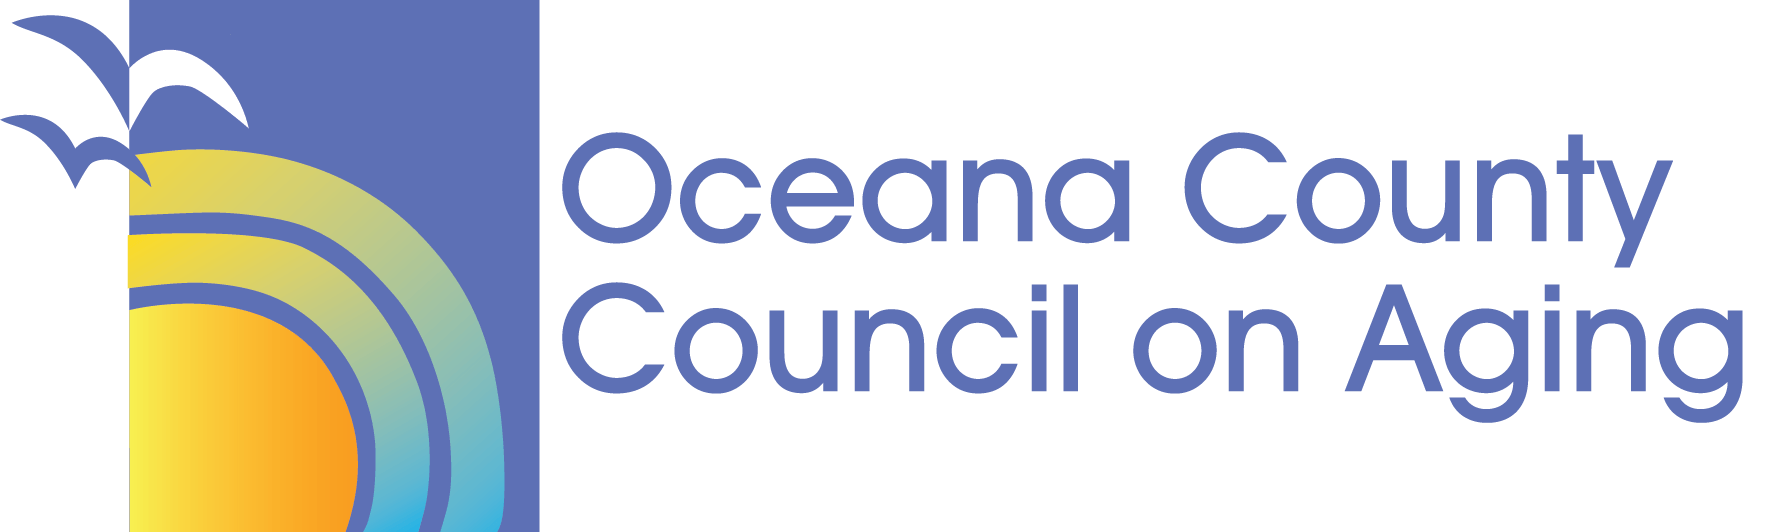 Aging Logo - Welcome | Oceana County Council on Aging